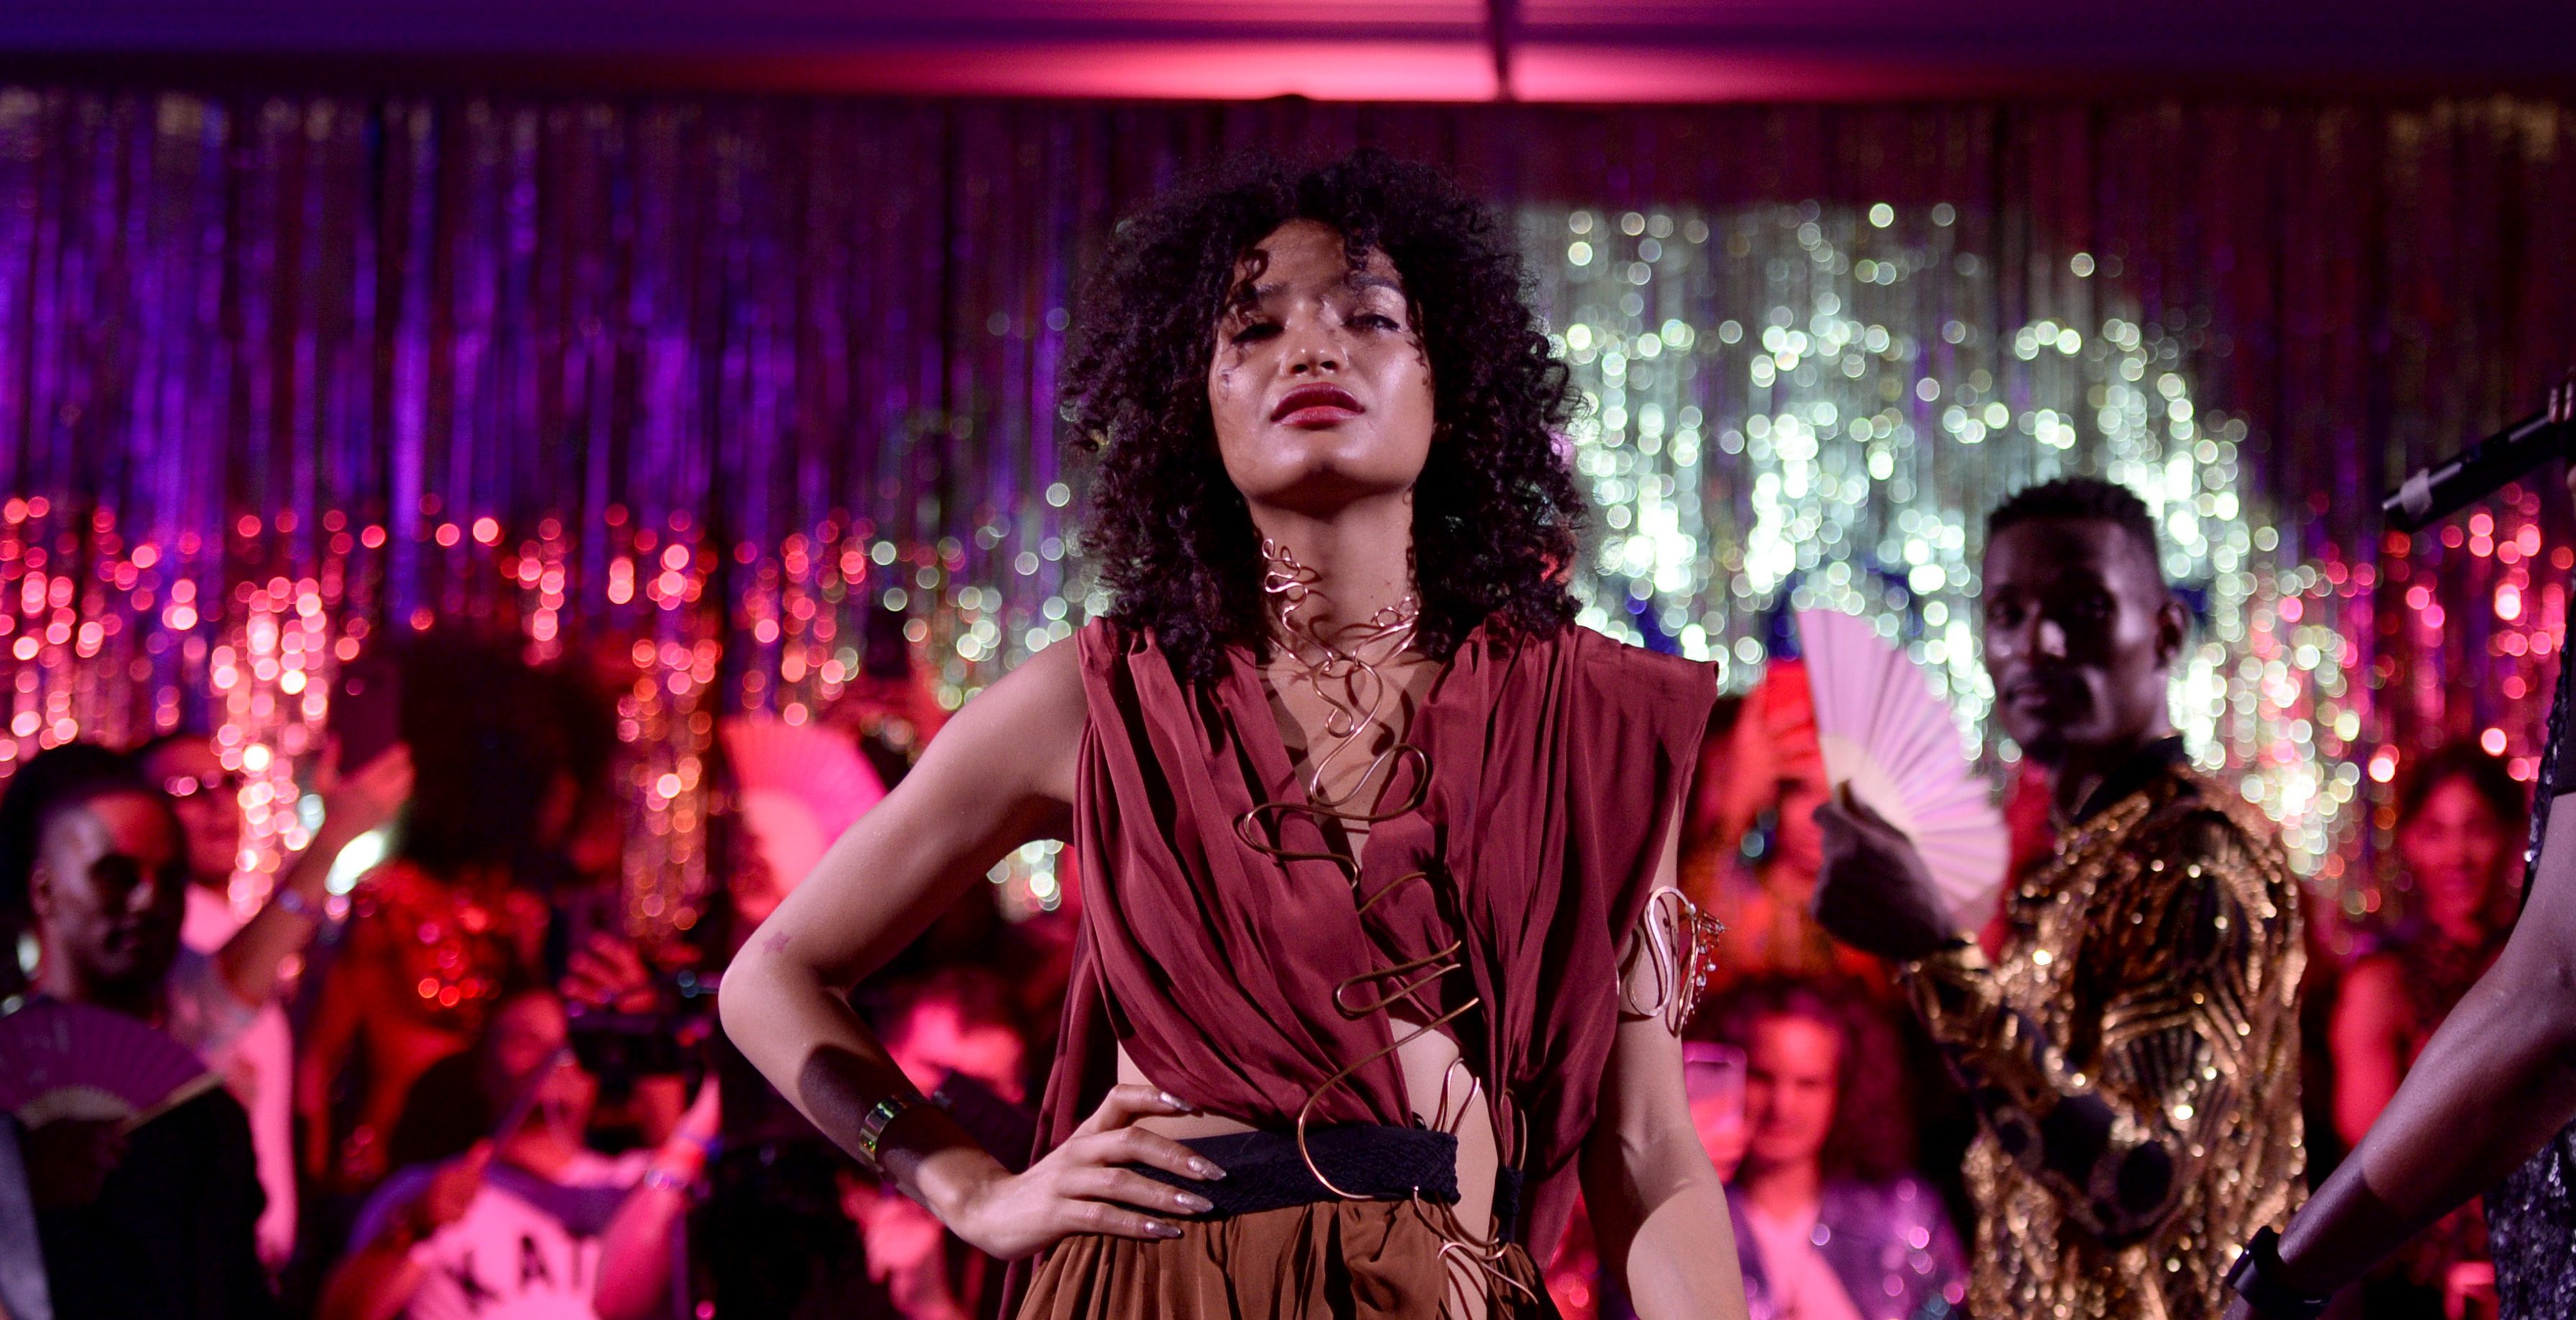 Groundbreaking LGBTQ drama Pose is now available to stream on Netflix UK